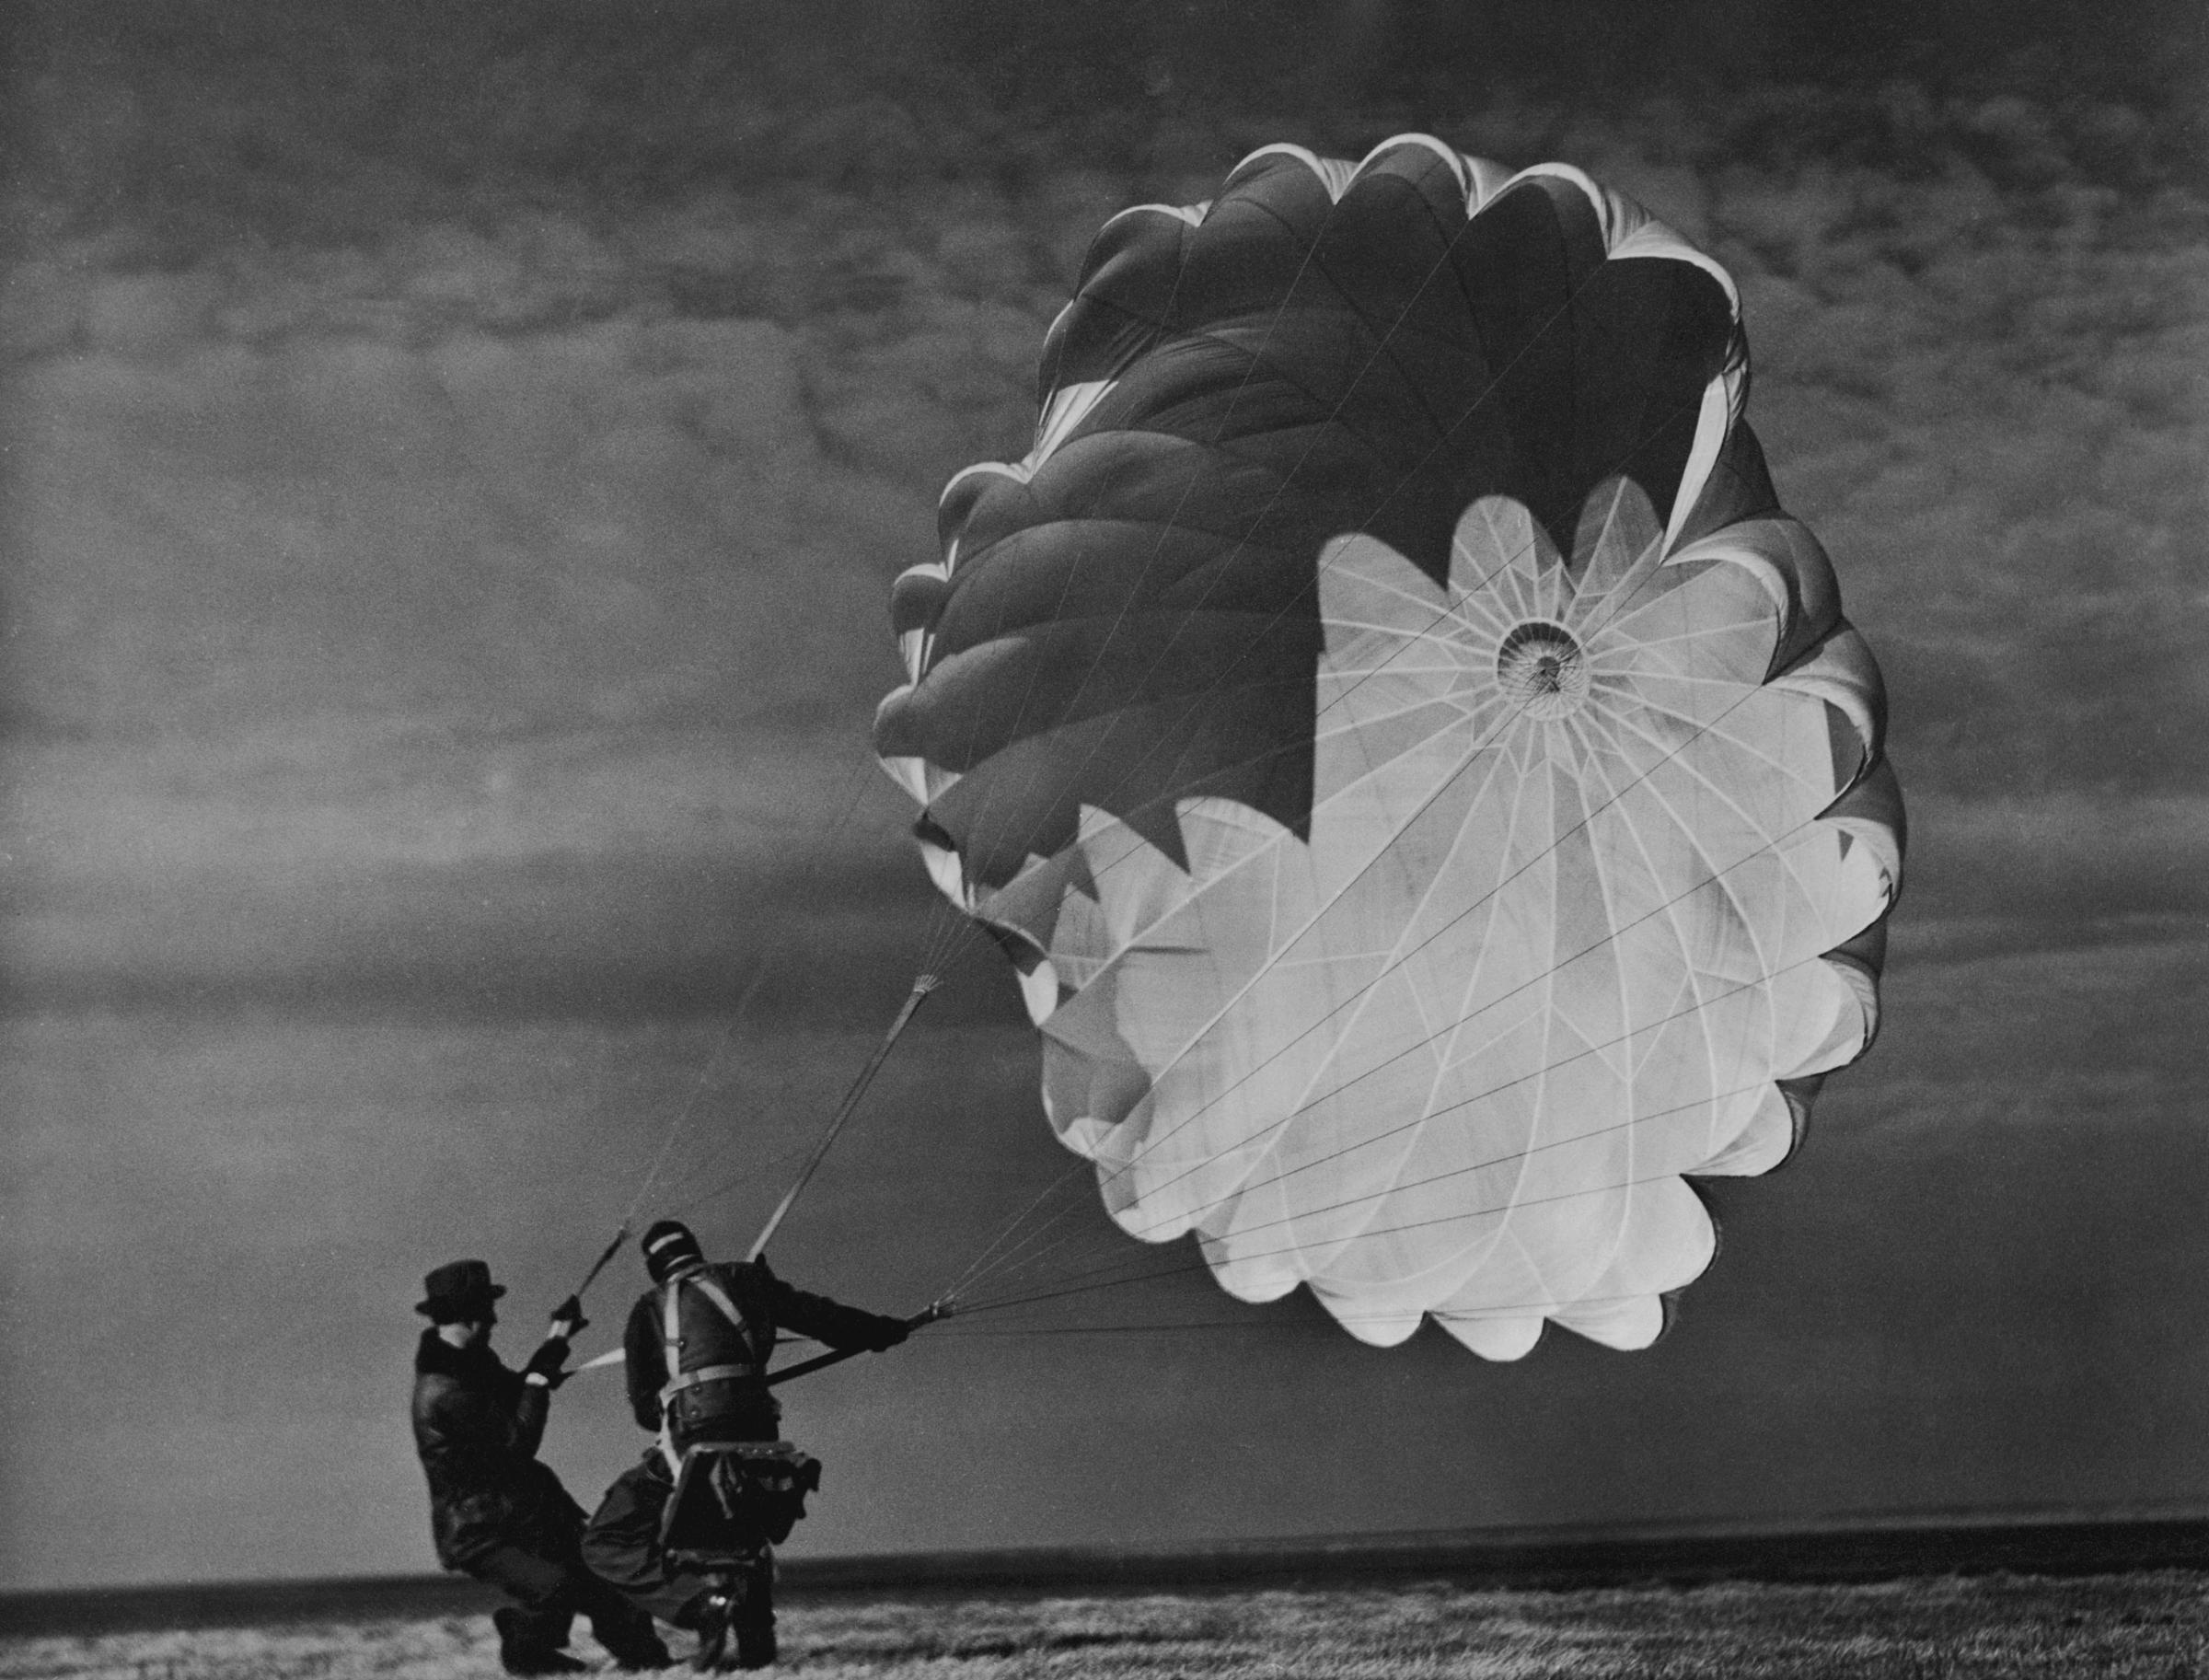 A parachute jumper testing equipment for the Irving Air Chute Co. gets some help while struggling to reel in his billowing chute, 1937.